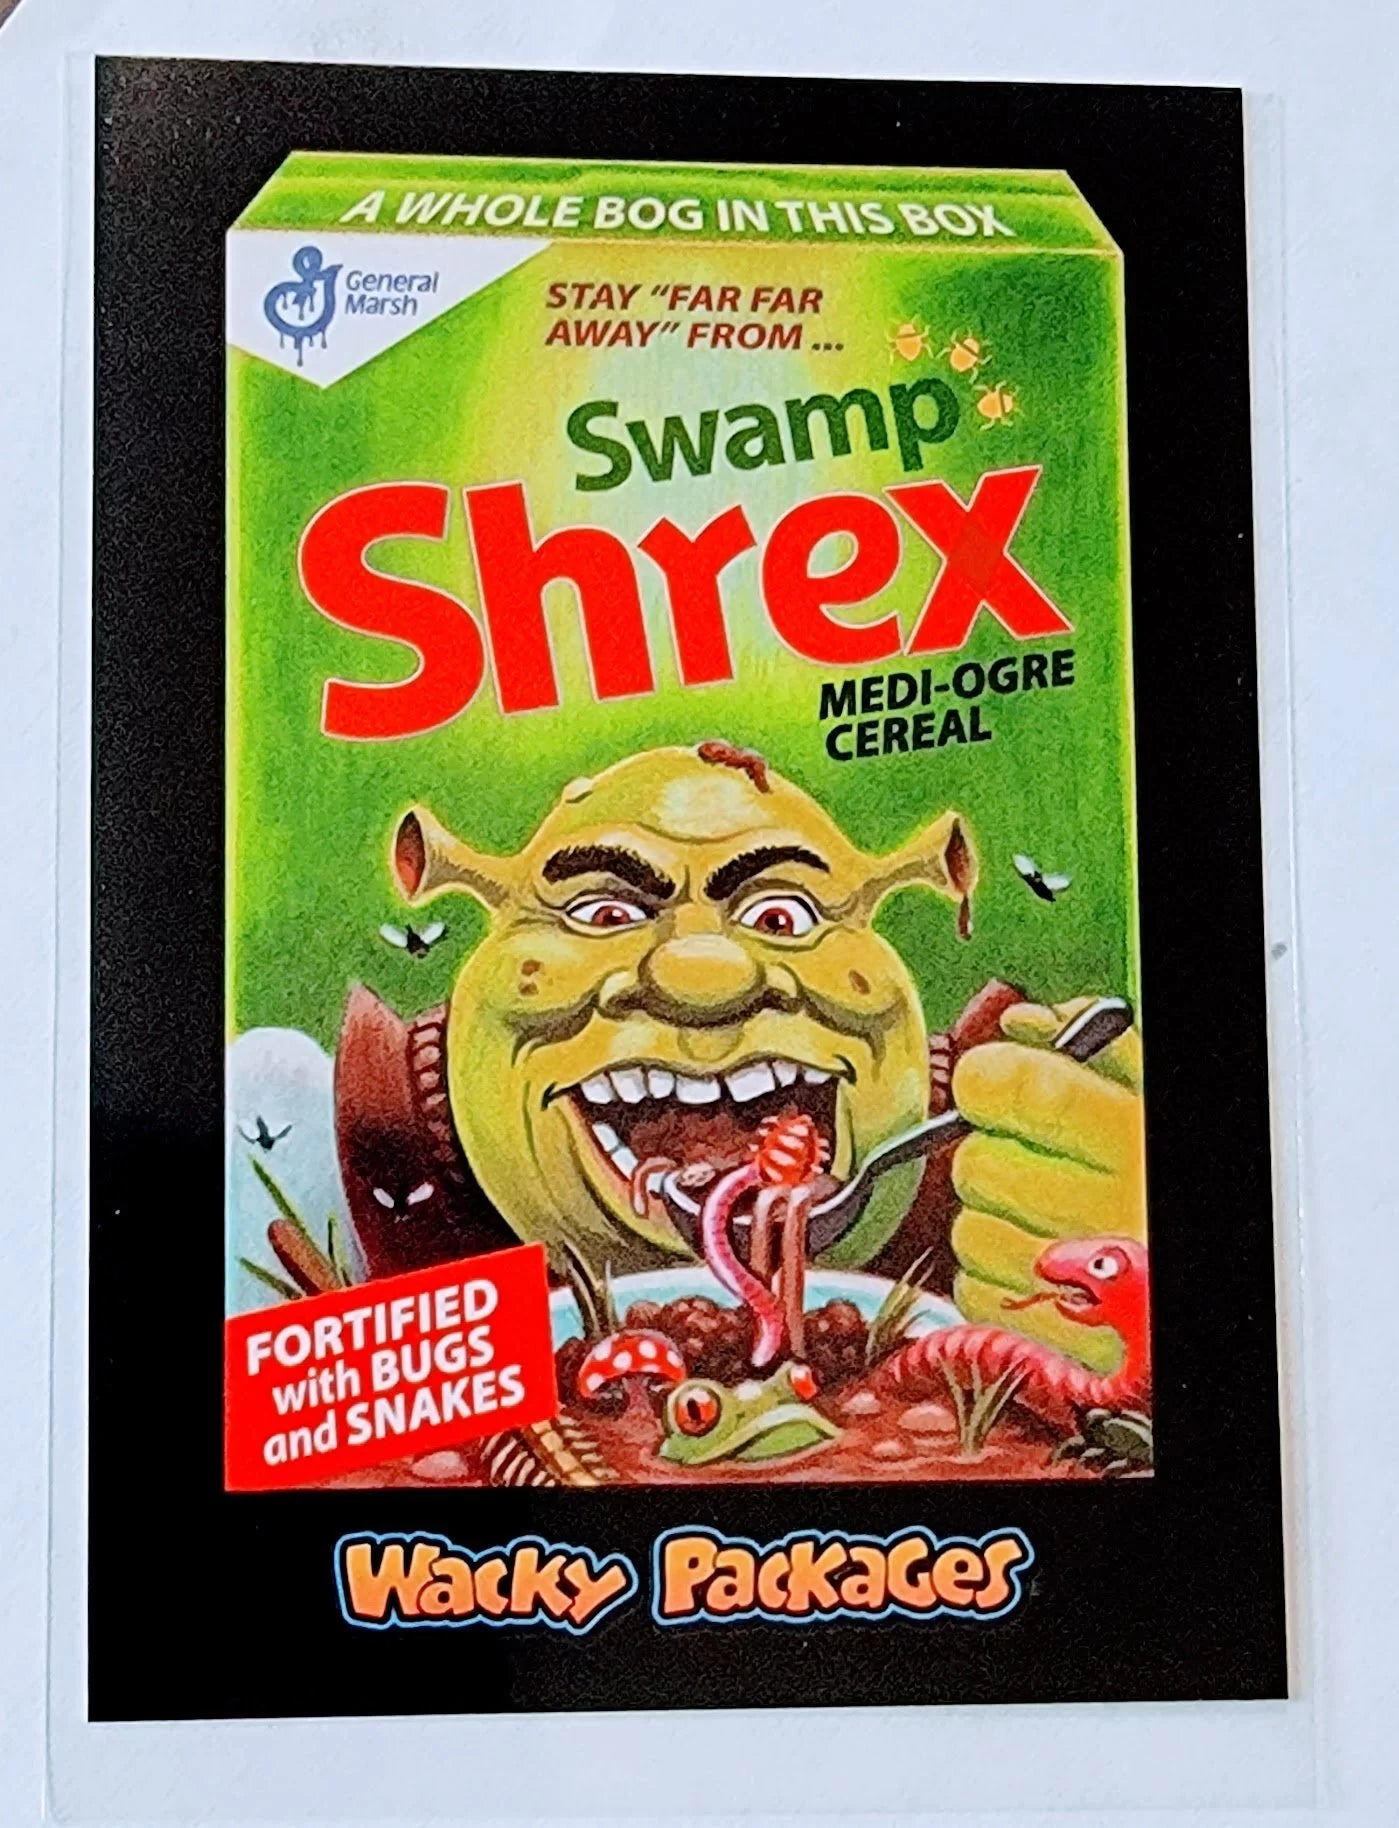 2017 Wacky Packages 50th Anniversary Swamp Shrex Medi-Ogre Cereal Sticker Trading Card MCSC1 simple Xclusive Collectibles   